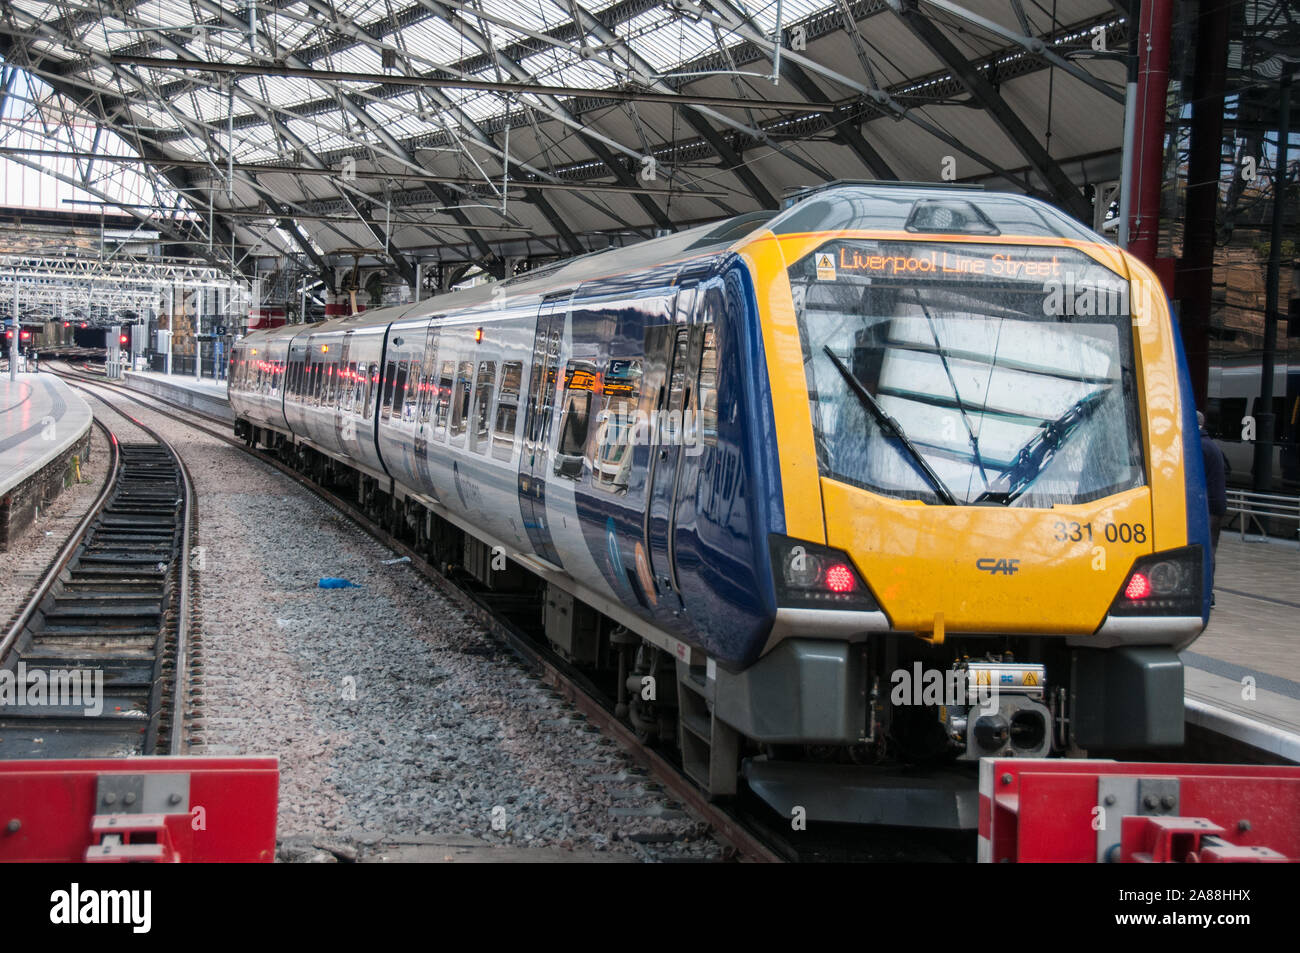 Around the UK - Merseyside - Commuter train in Liverpool Lime Street Station Stock Photo